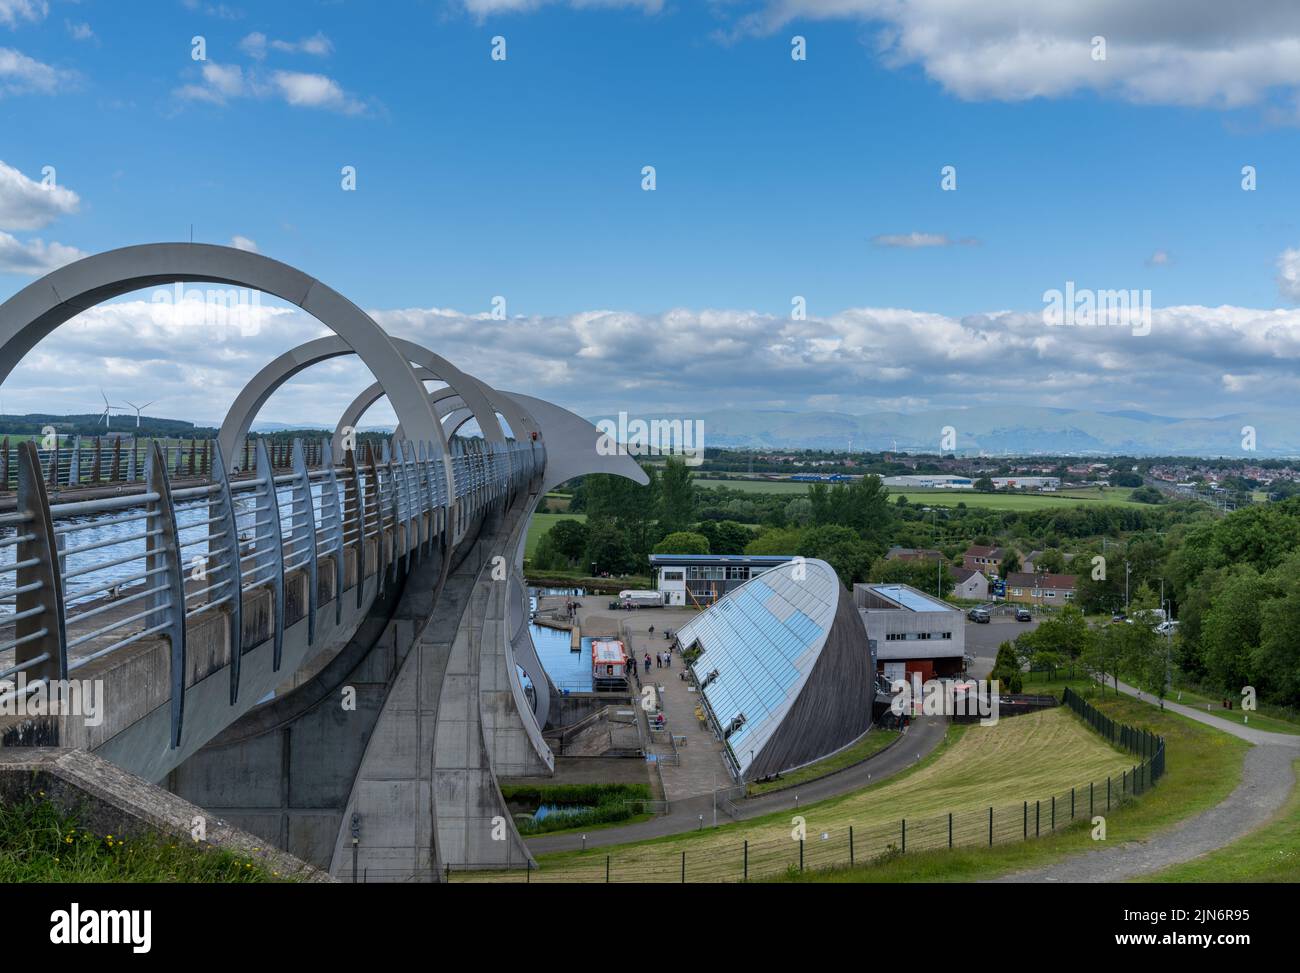 Falkirk, United Kingdom - 19 June, 2022: view of the hydraulic Falkirk Wheel boat lift and canals Stock Photo